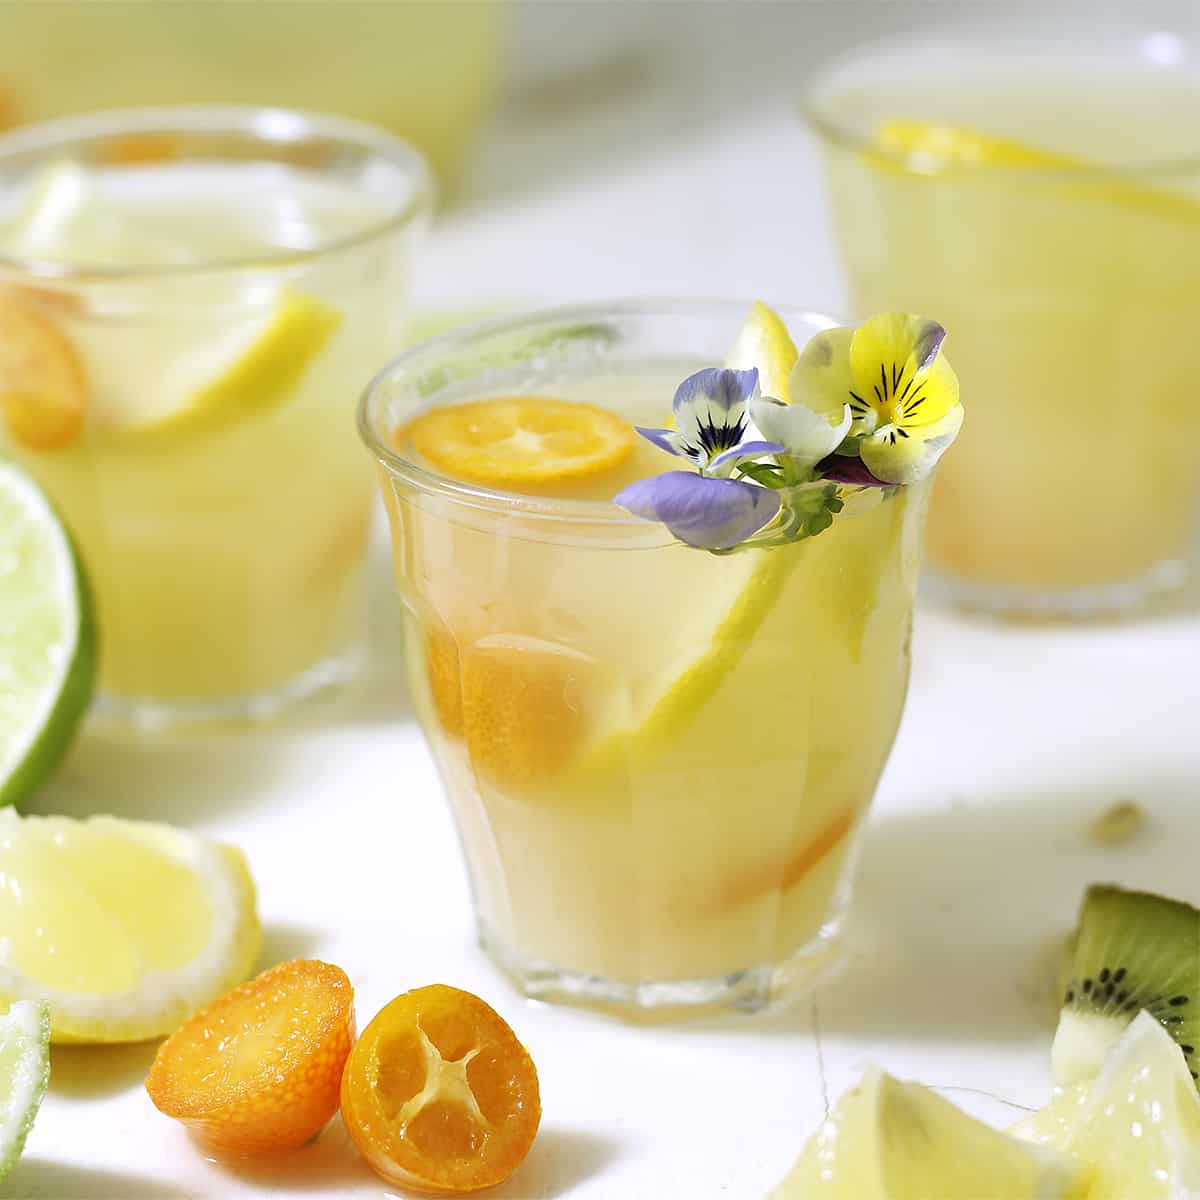 a glass of lemonade with kumquats and a flower